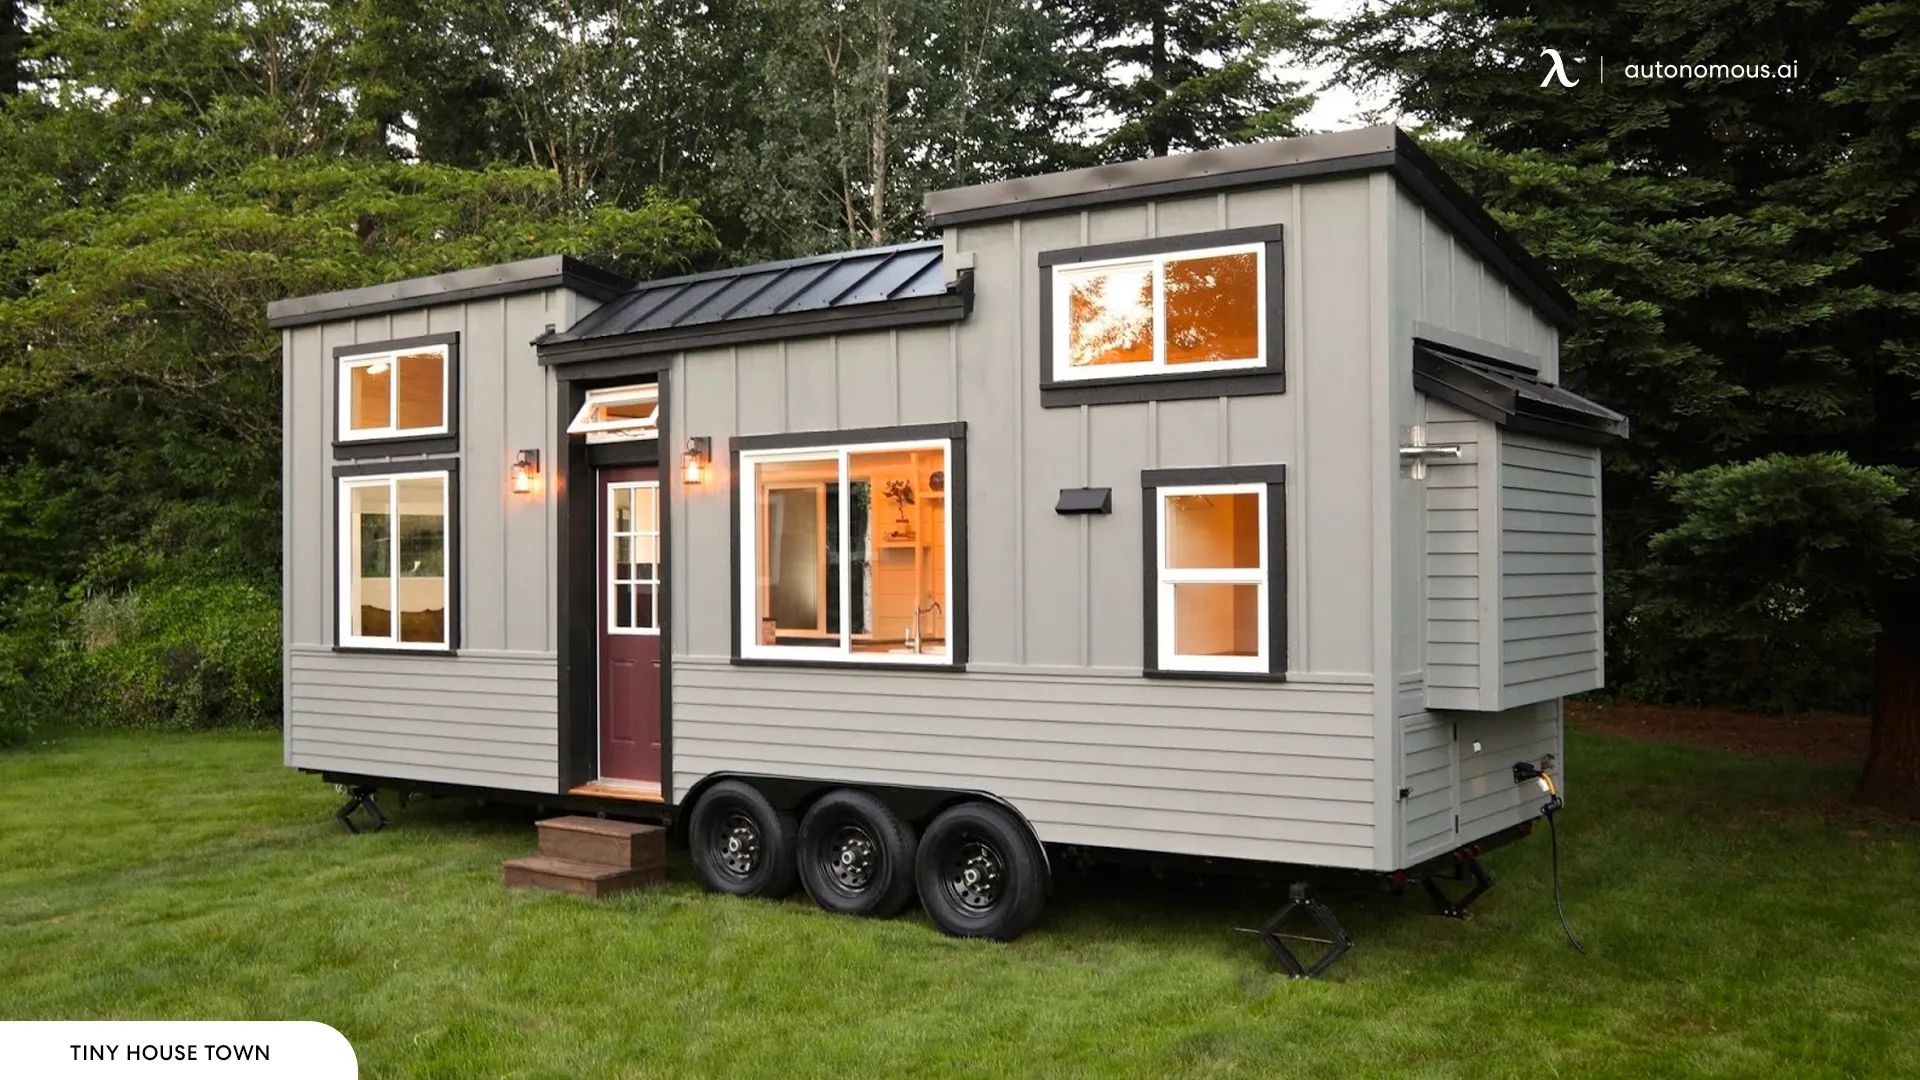 Dallas Tiny Homes: Finding Affordable and Stylish Living Spaces